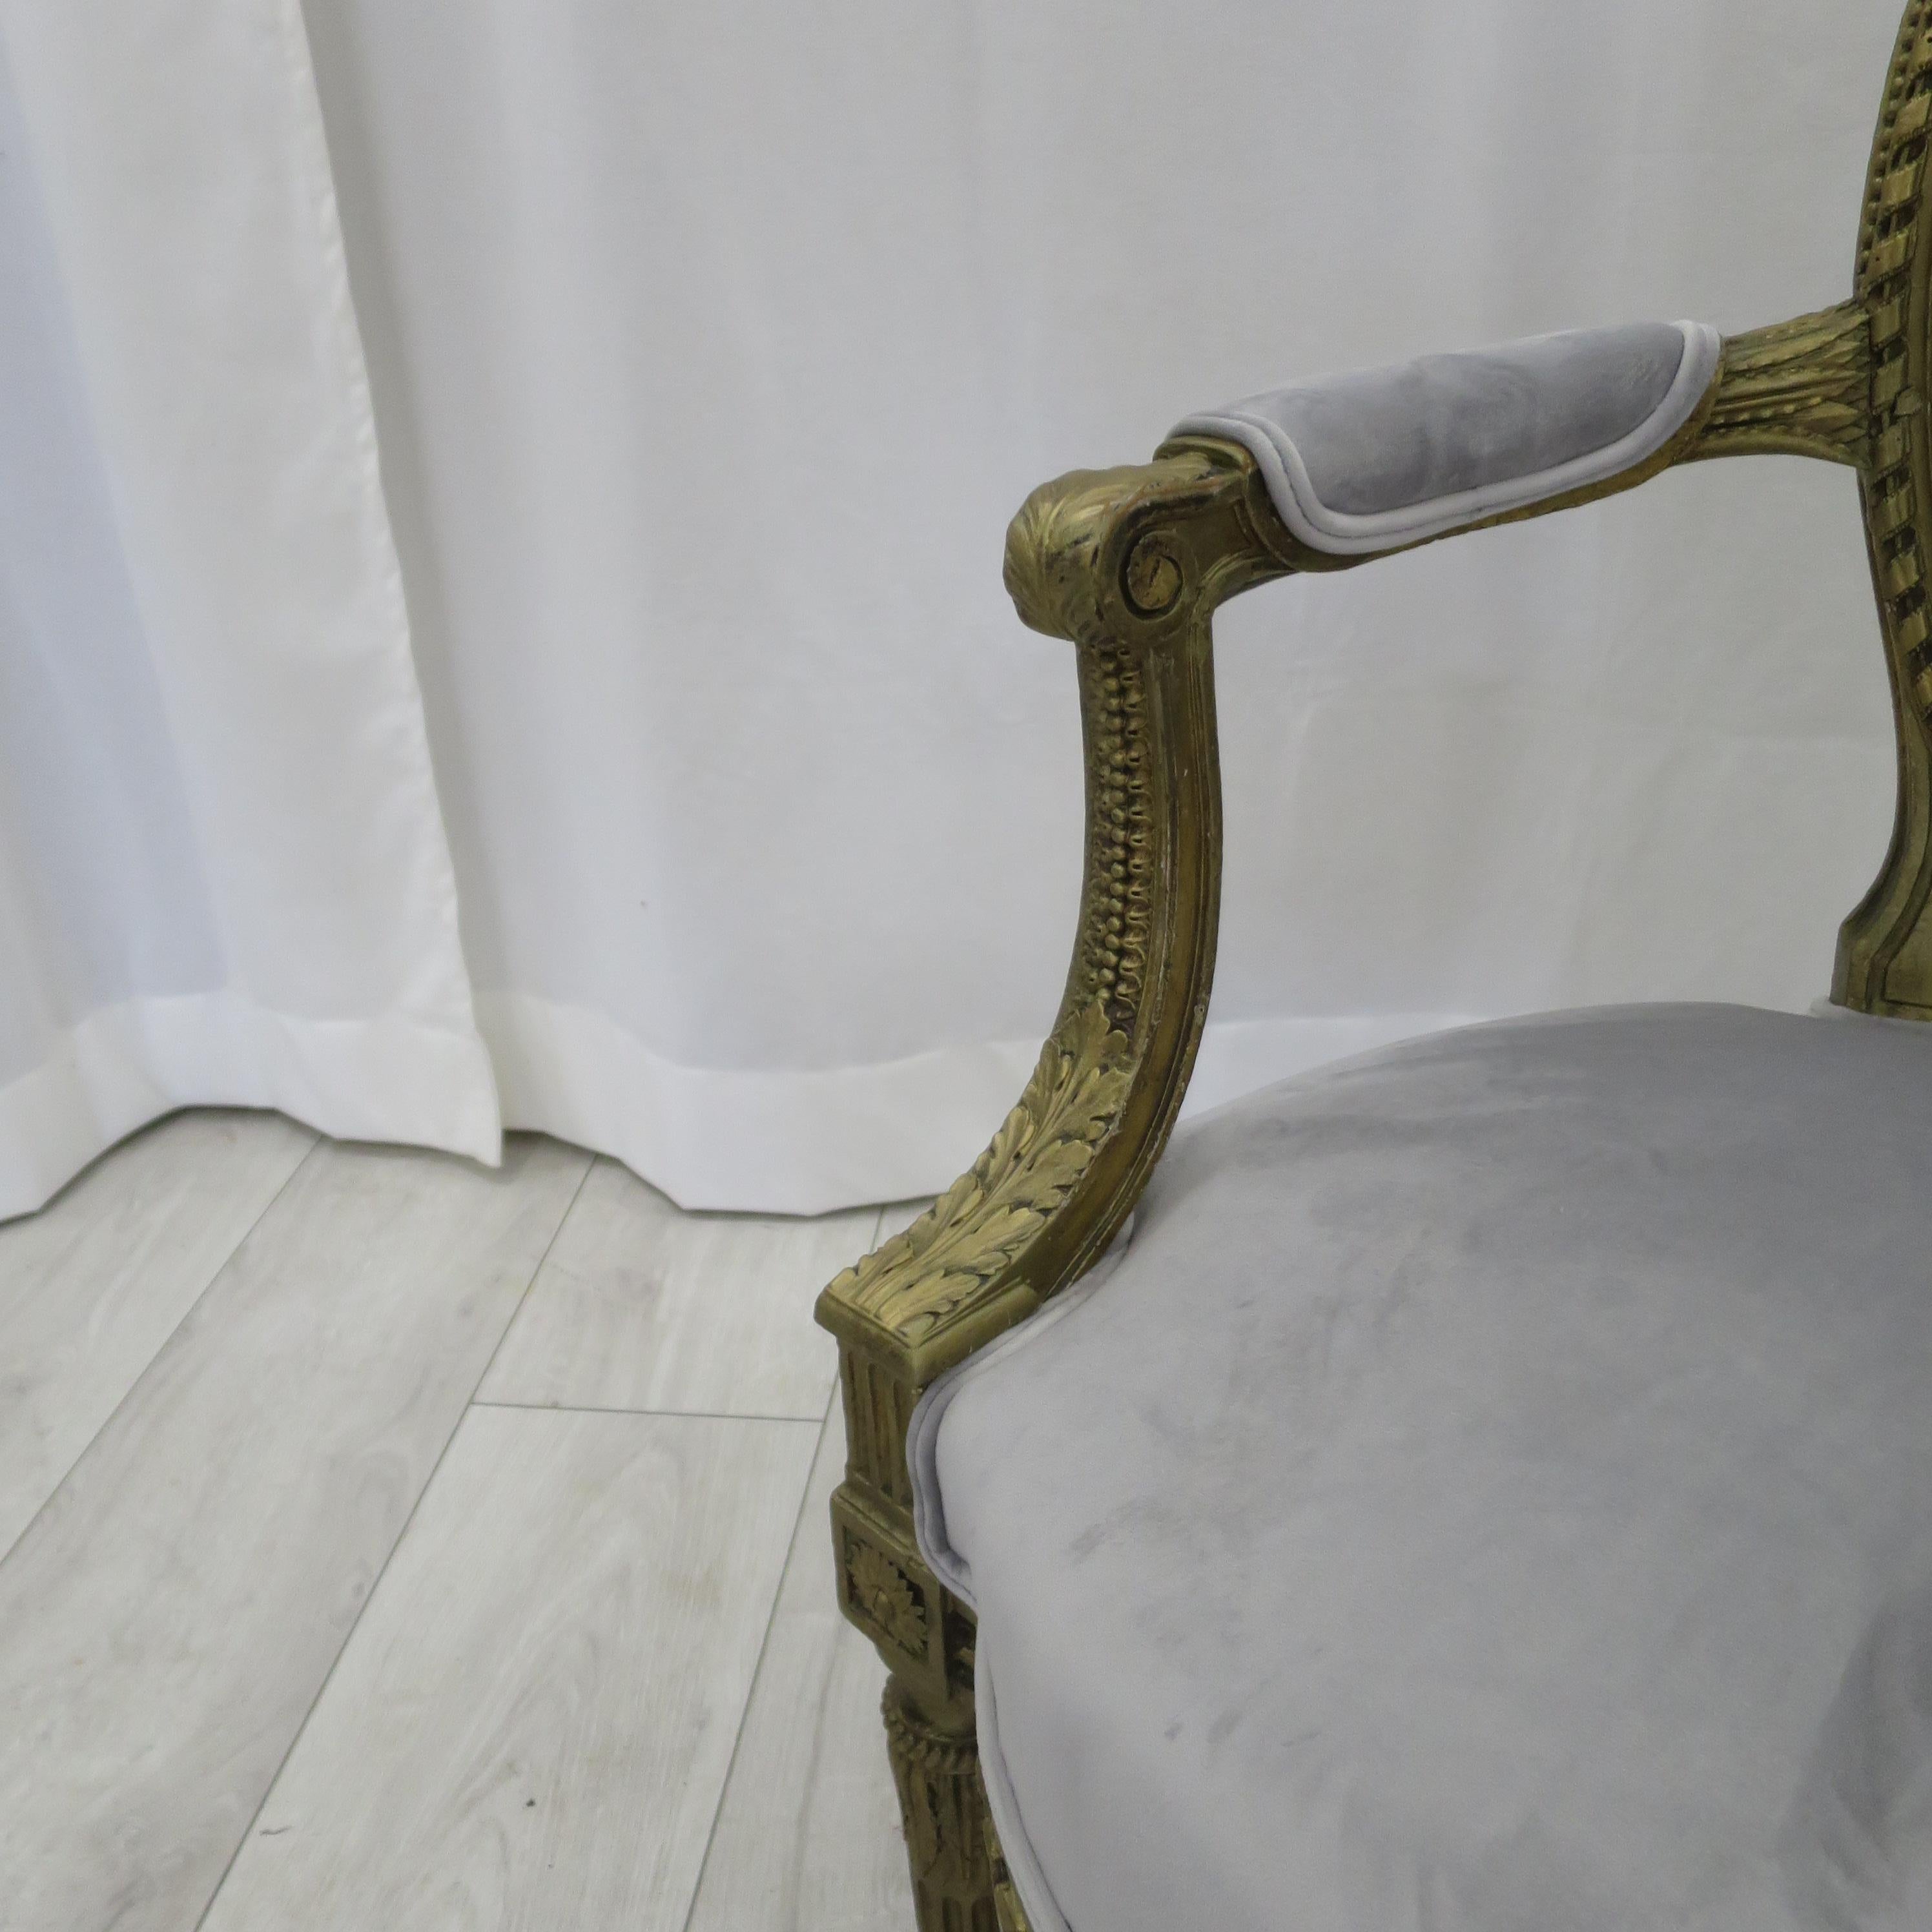 Wood Pair of Cabriolet Armchairs in Giltwood 19th Century Style Louis XVI For Sale